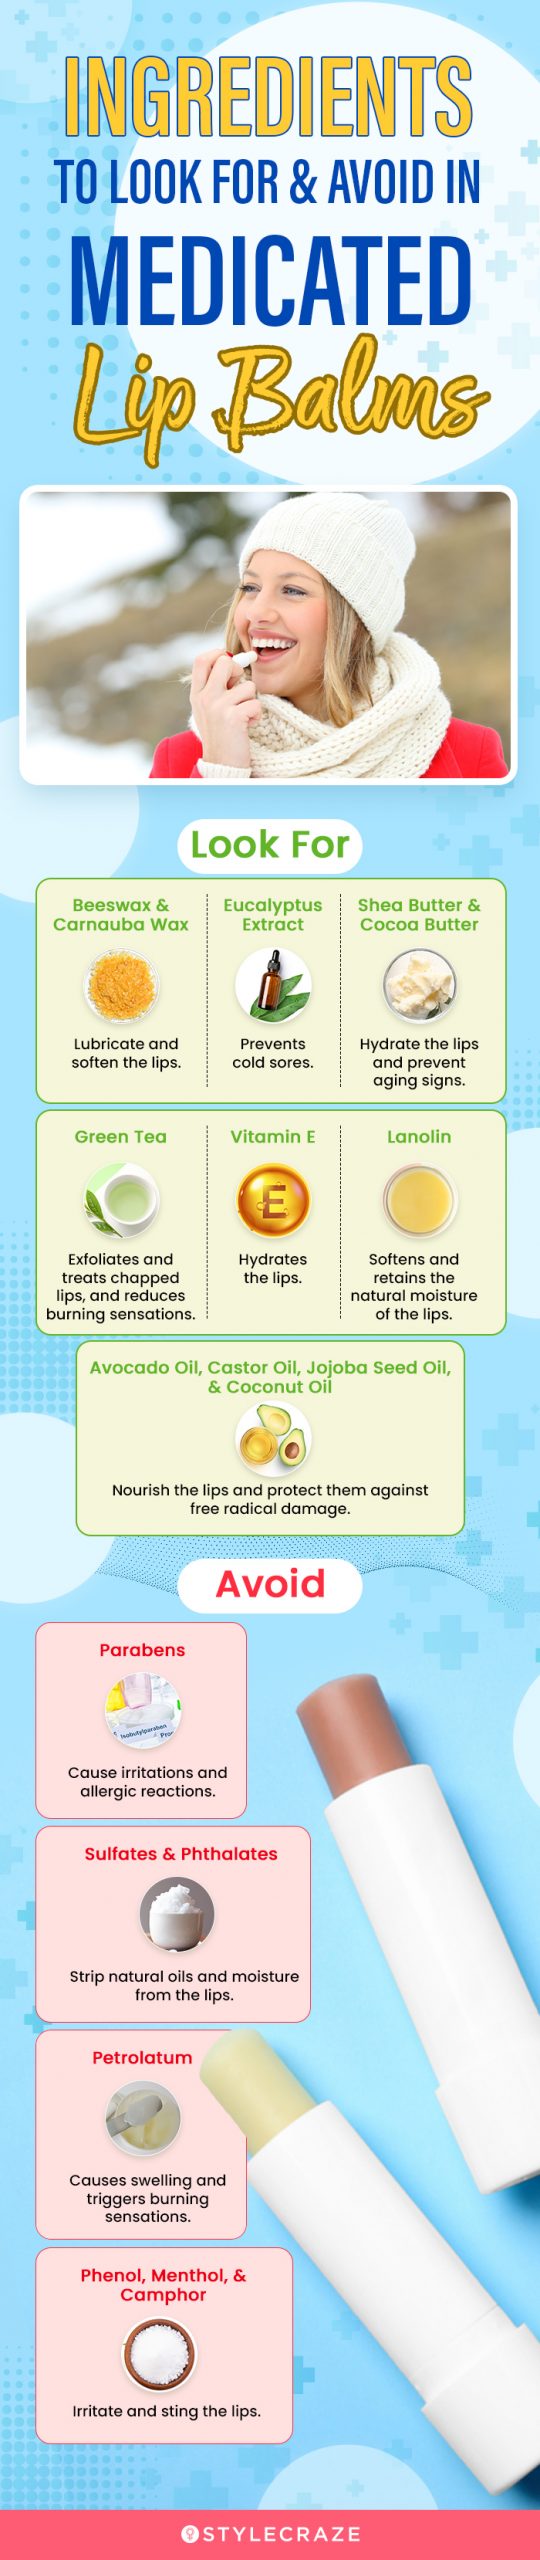 Ingredients To Look For & Avoid In Medicated Lip Balms (infographic)